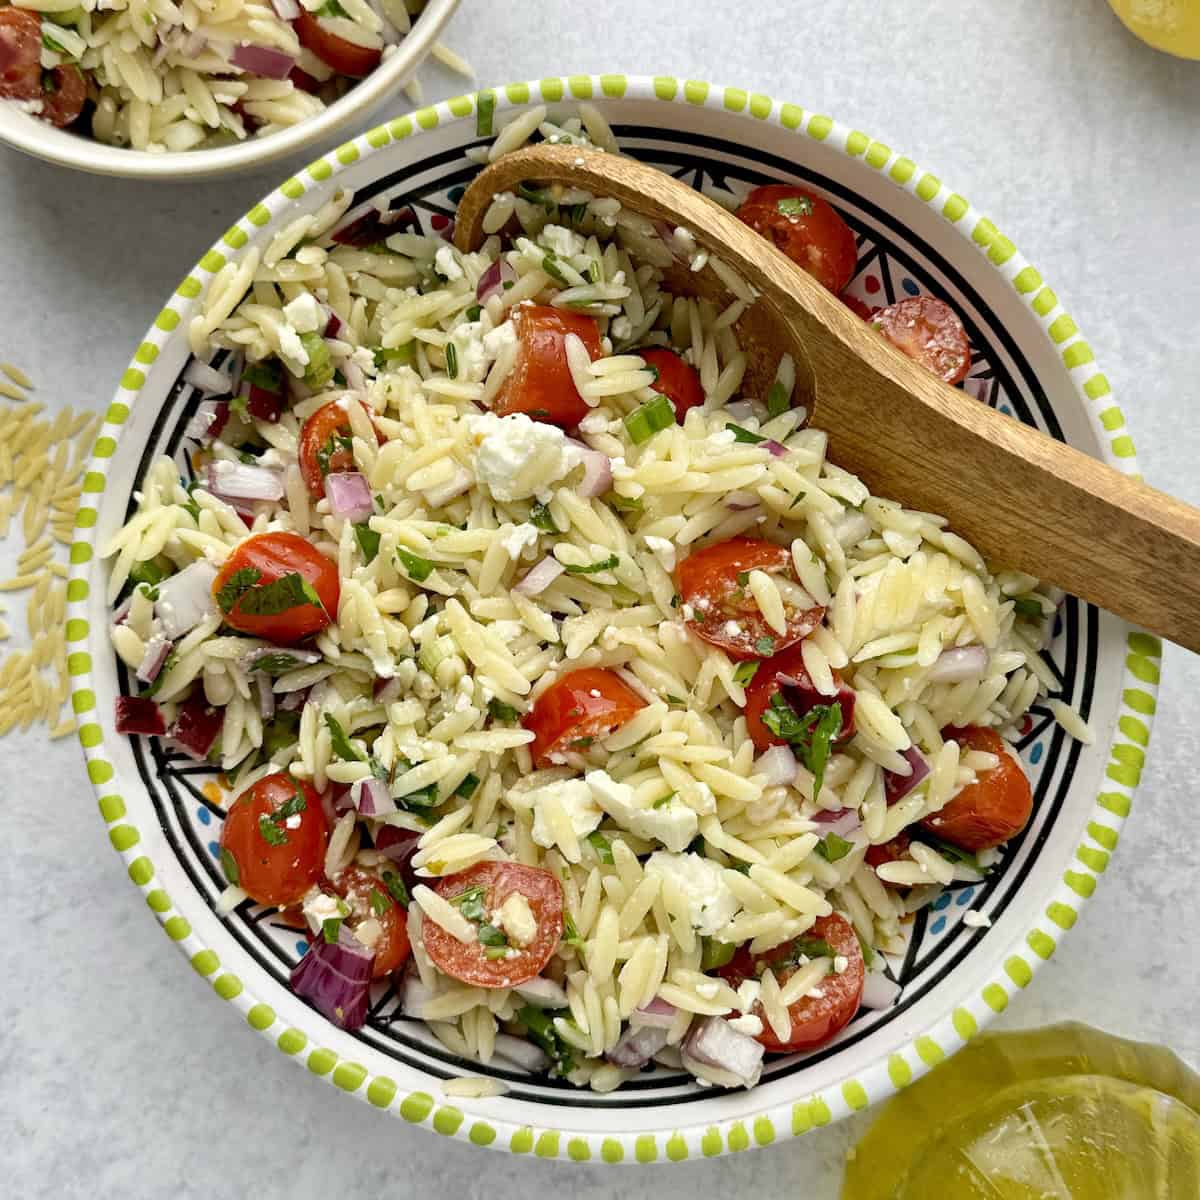 Orzo pasta and feta salad served in bowl next to lemon slices and orzo pasta.